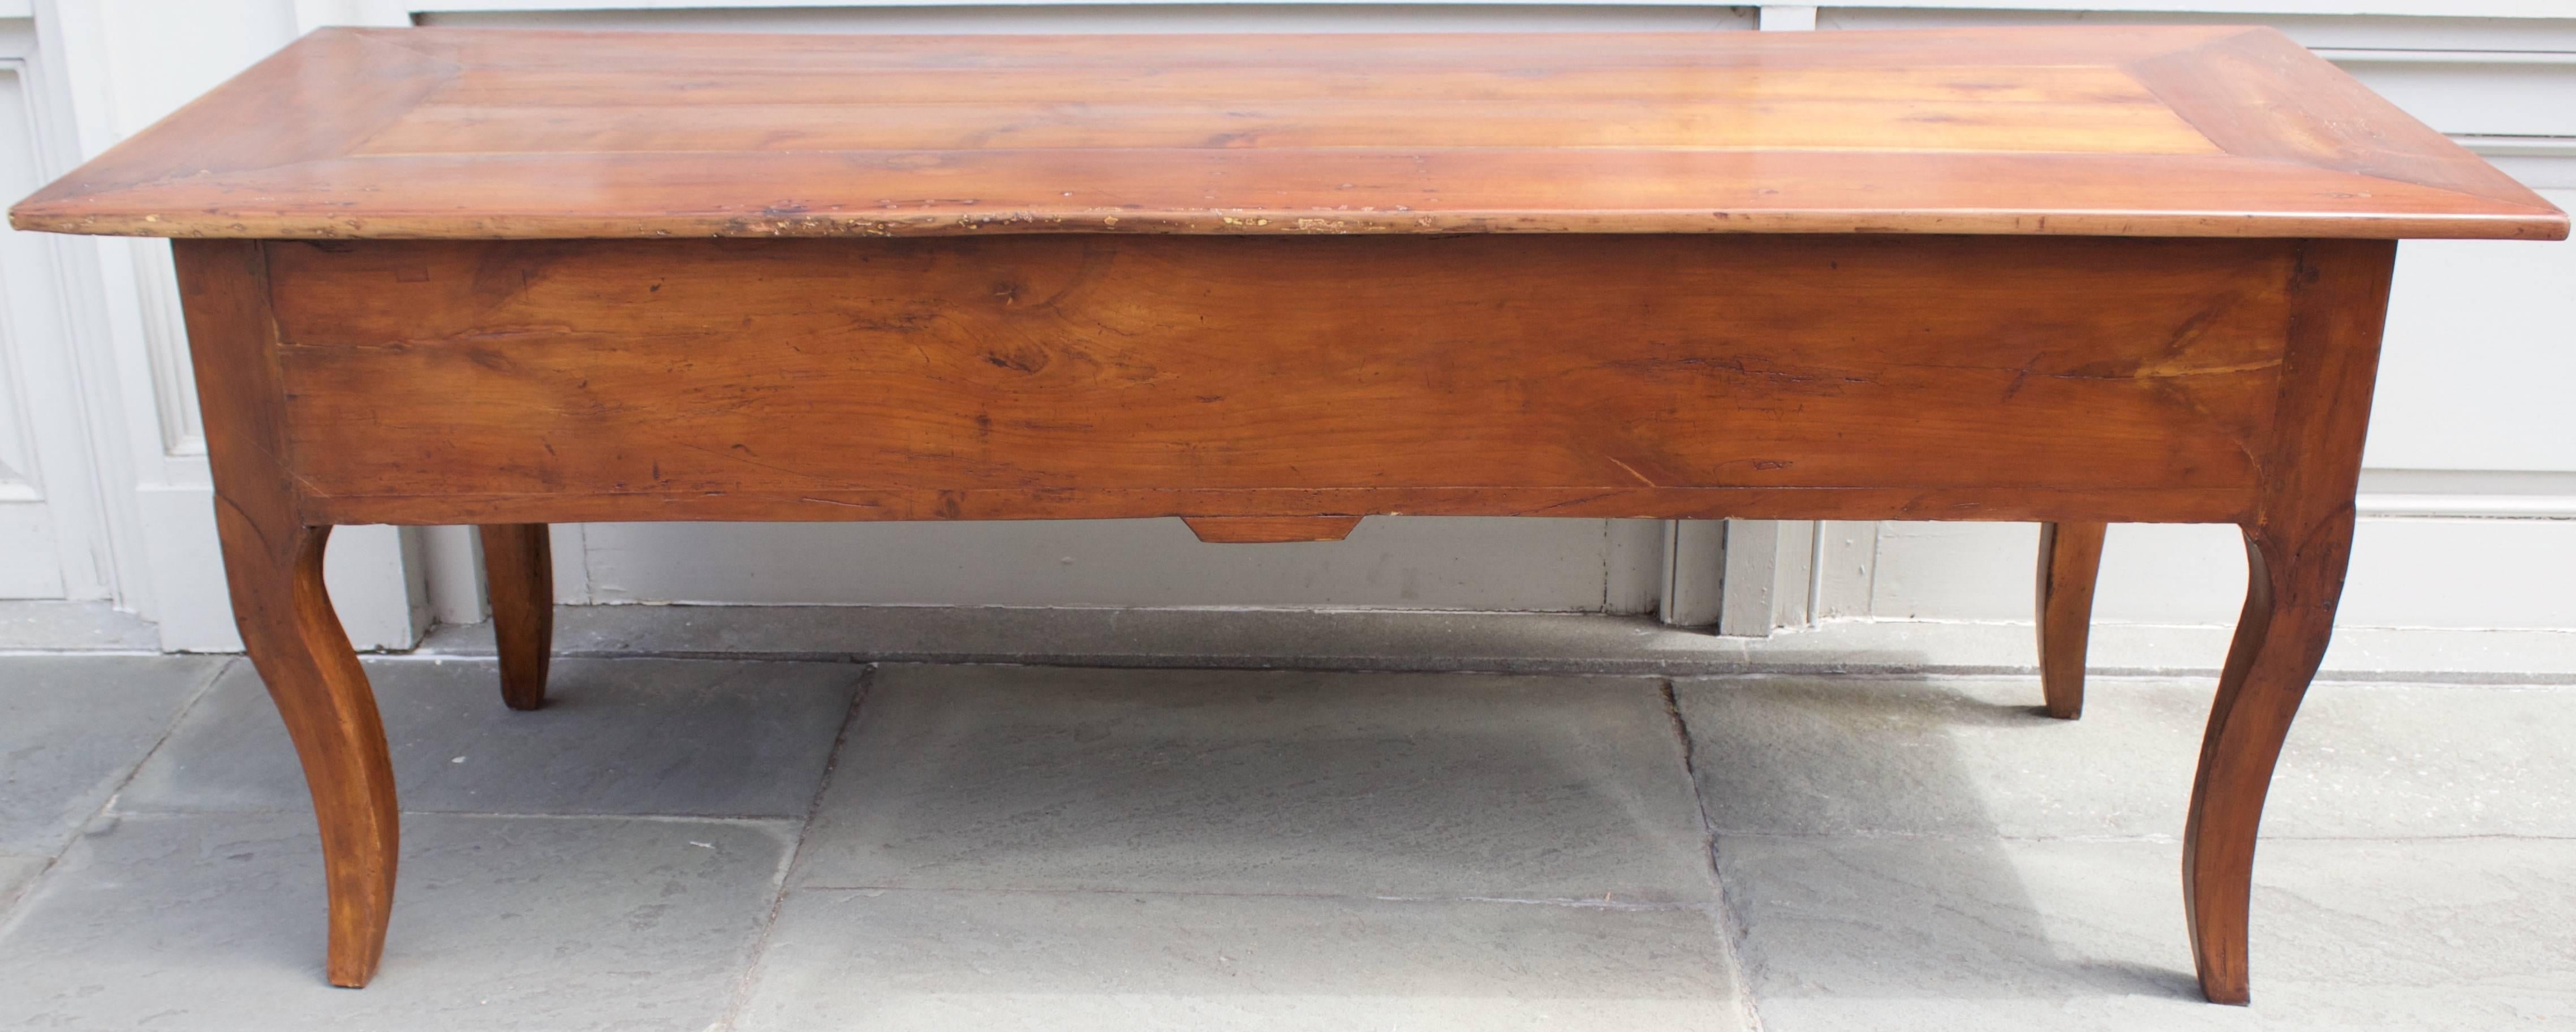 Large Antique French Provincial Louis XV Style Cherry Desk For Sale 4